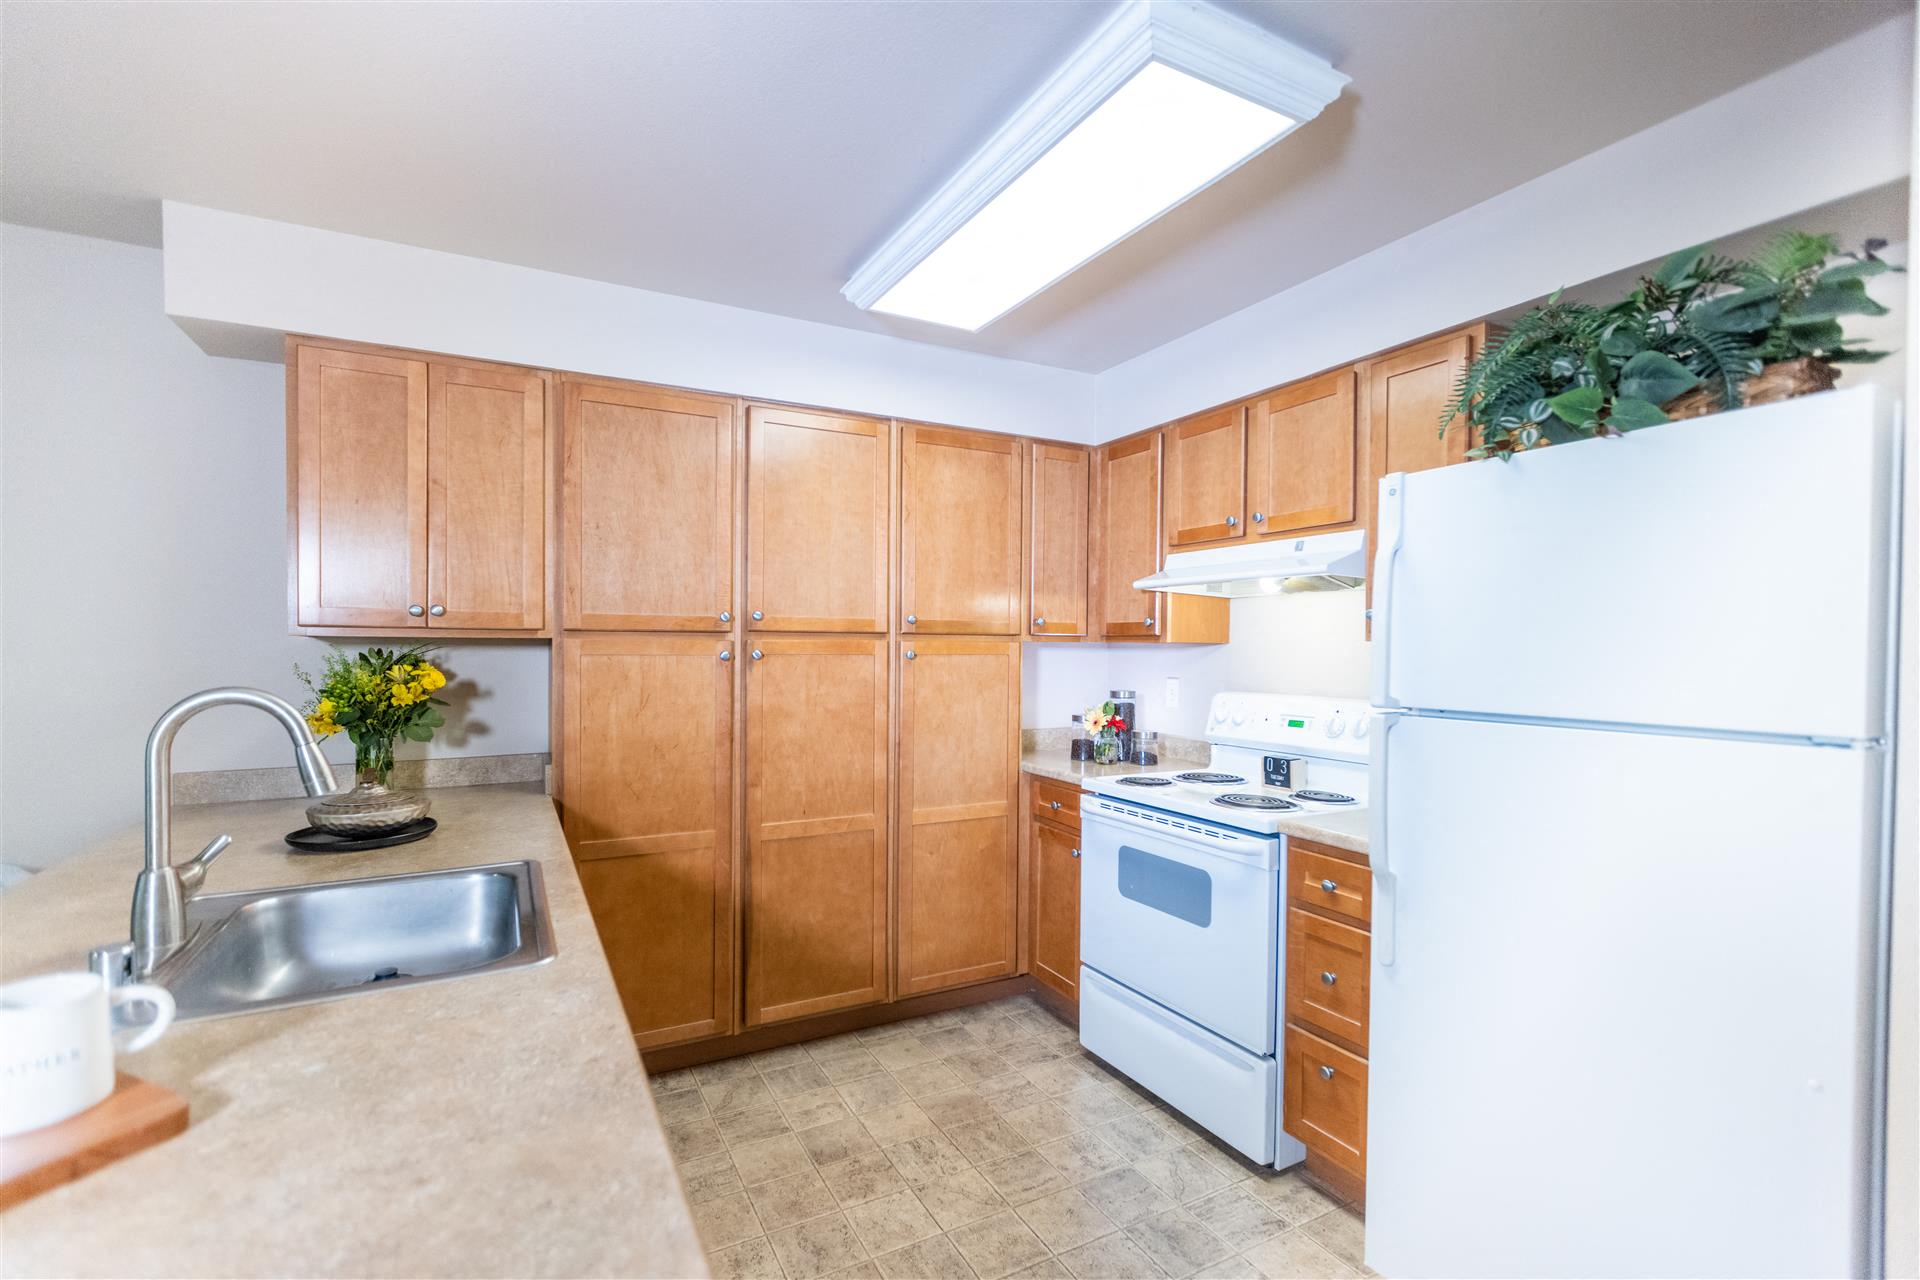 Kitchen cabinets and fridge at Cogir of Queen Anne, Seattle, 98109